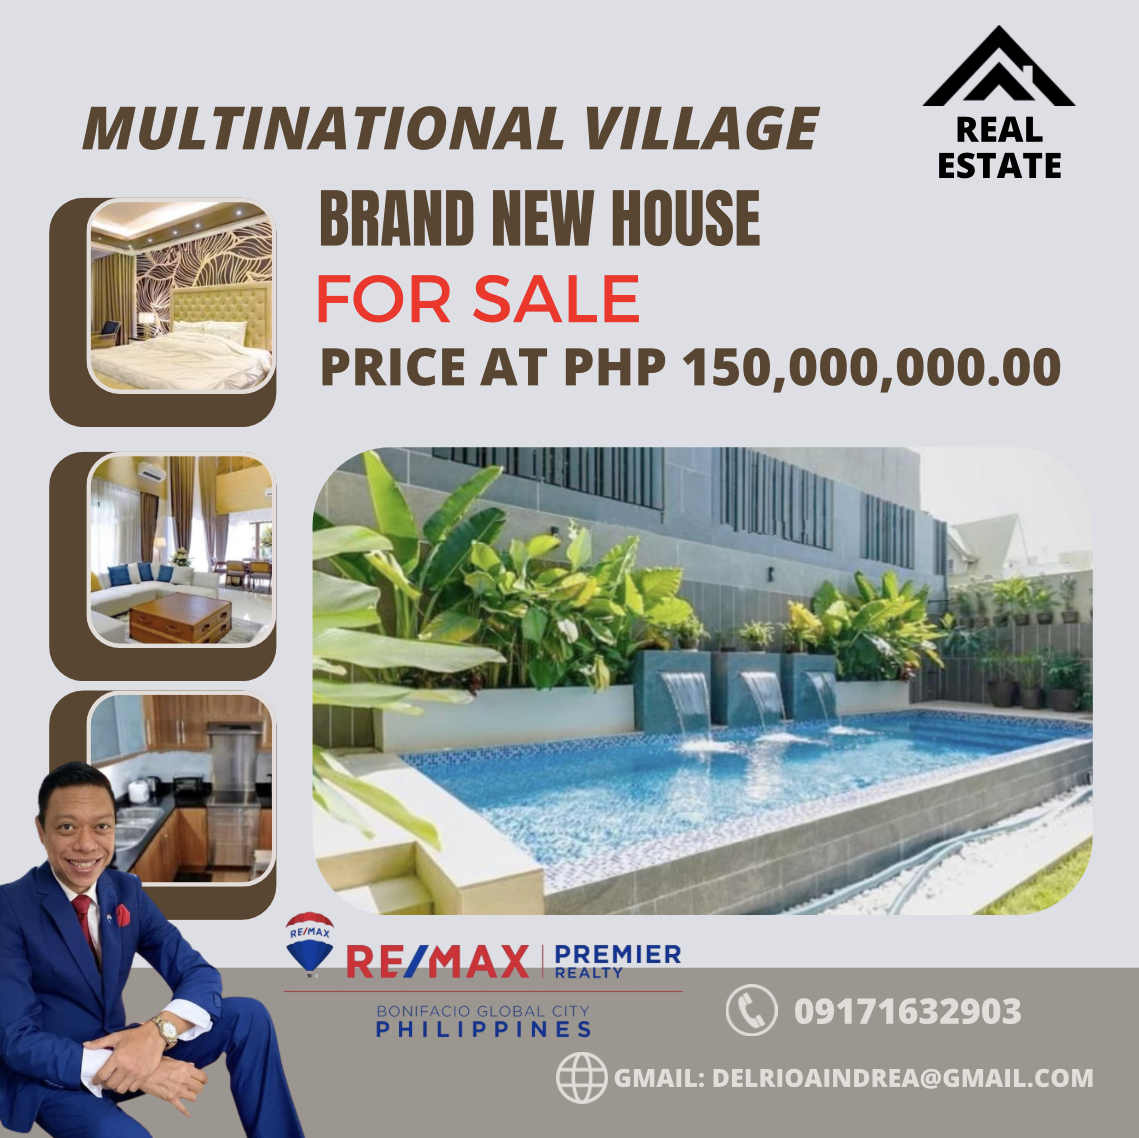 Brand New House for Sale in Multinational Village, Parañaque City‼️